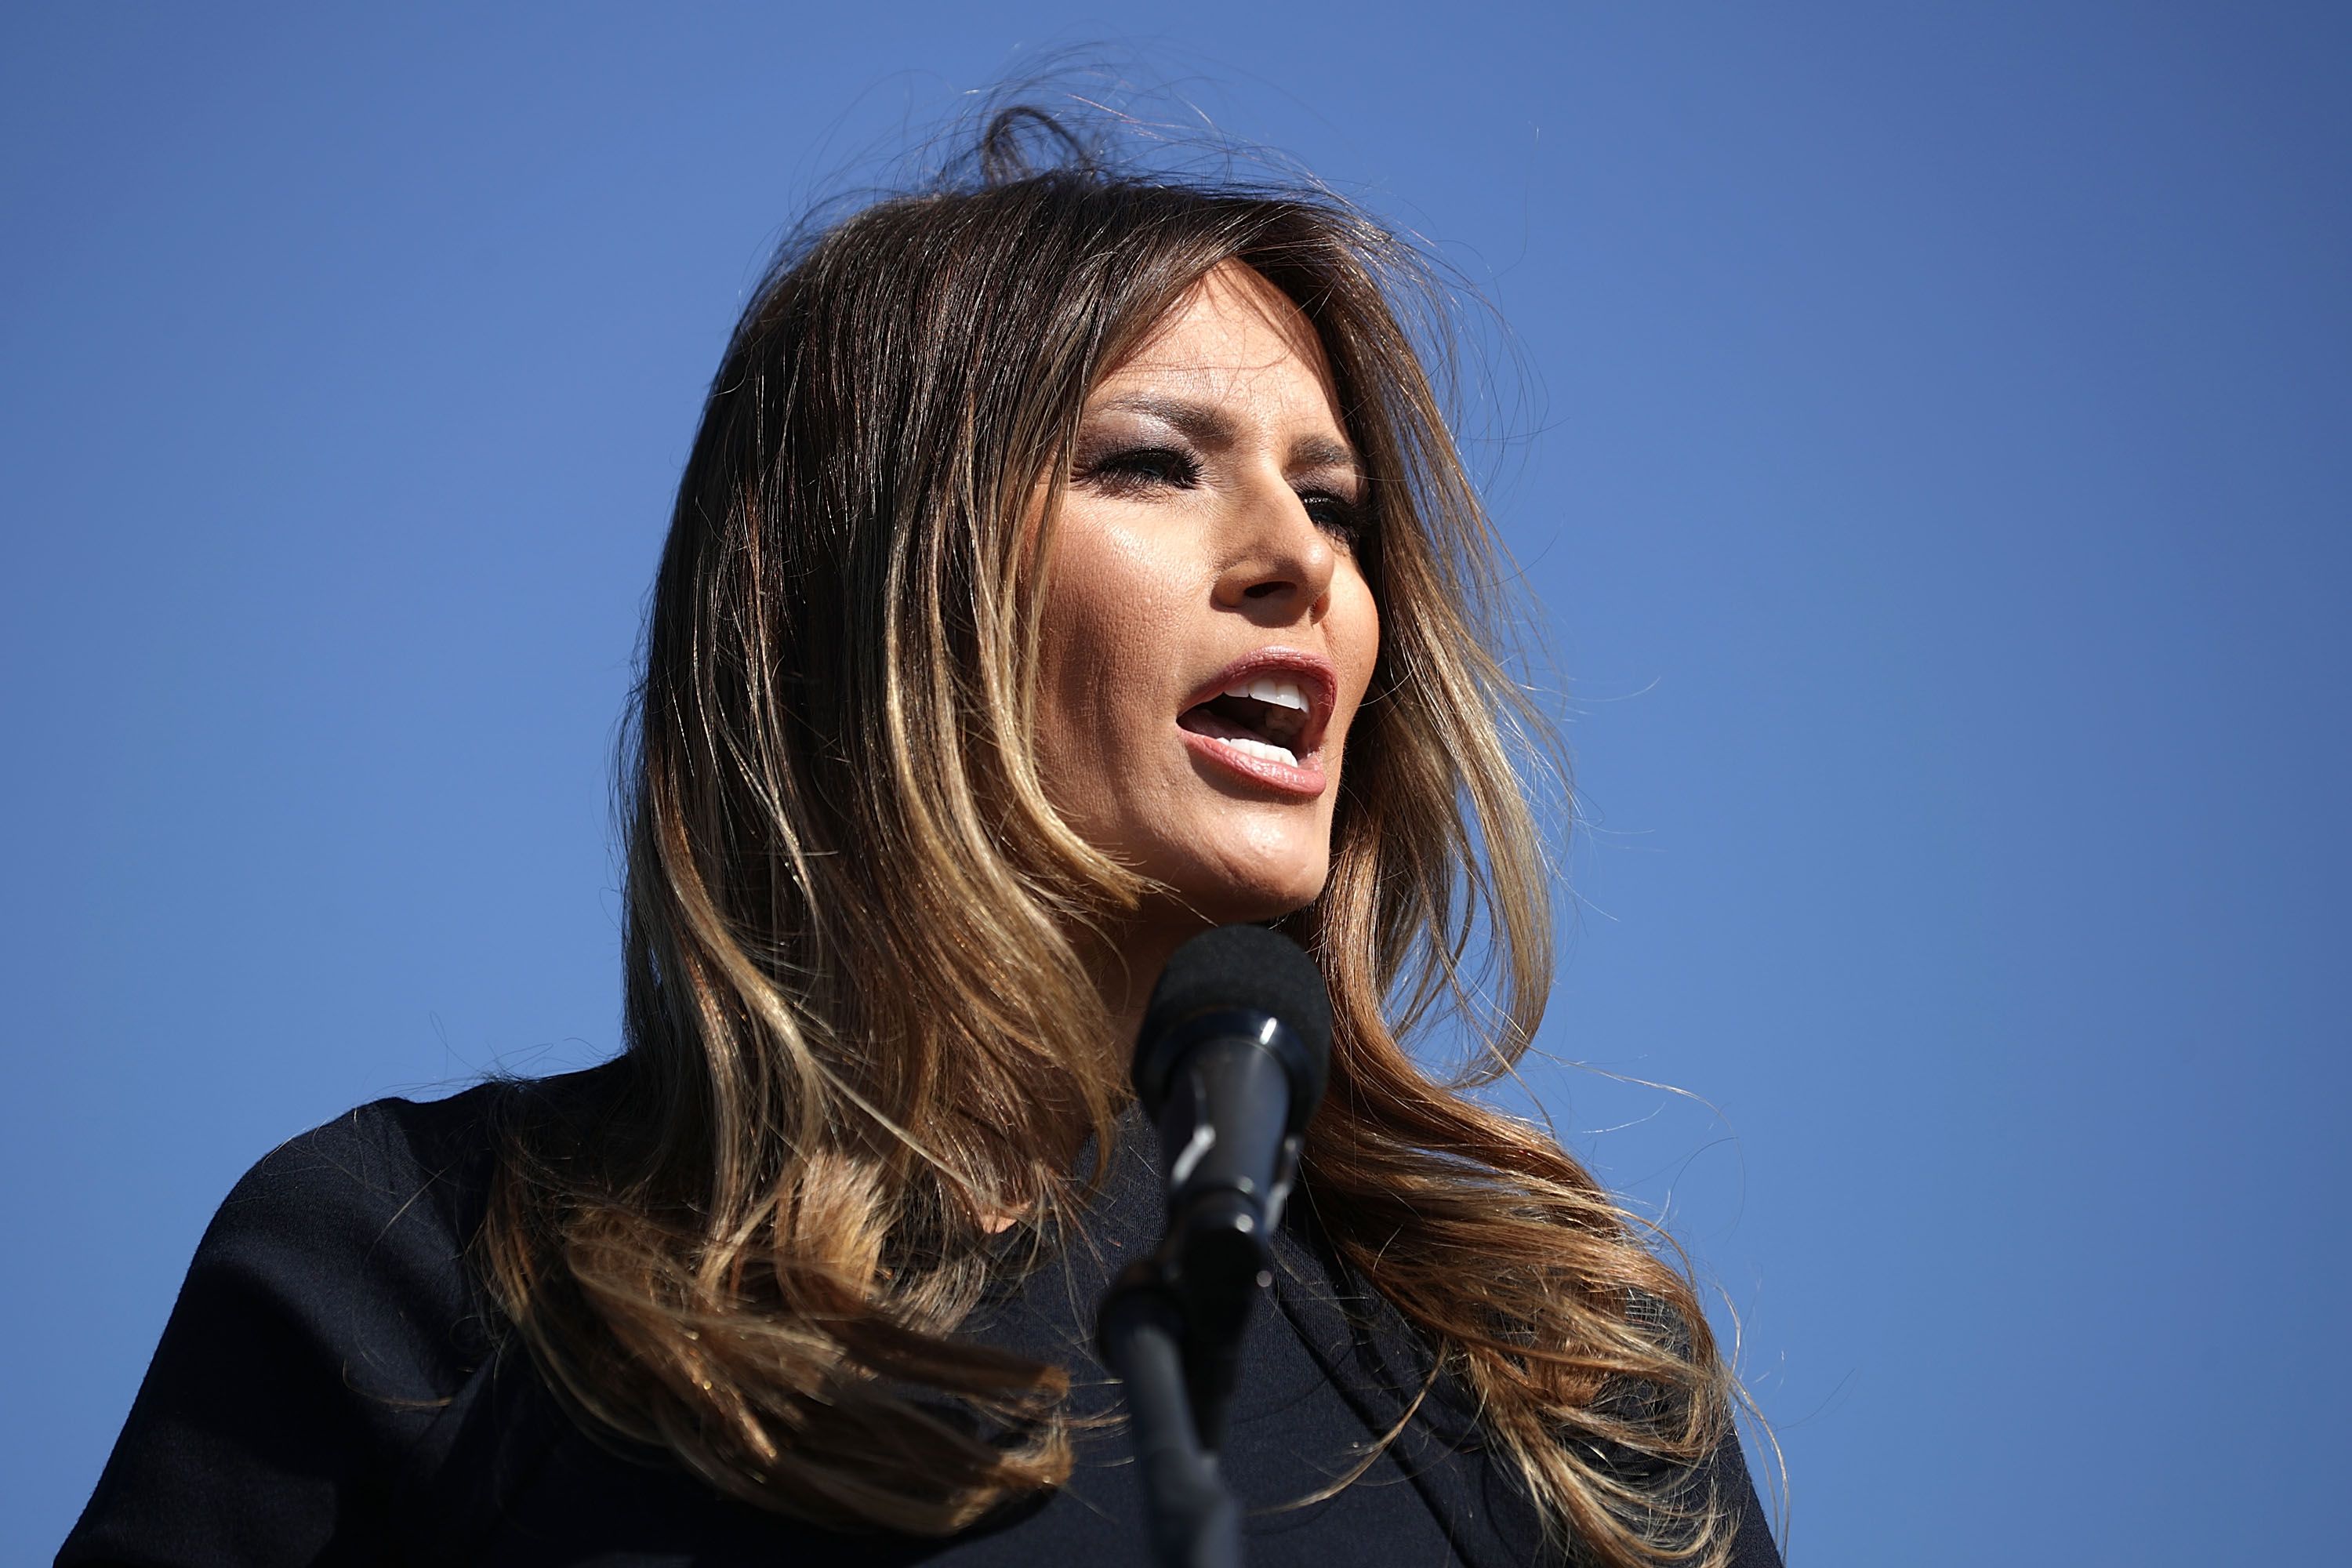 Melania Trump, wife of Republican presidential nominee Donald Trump, introduces her husband during a campaign rally the Air Wilmington Hangar located at Wilmington International Airport, North Carolina | Photo: Getty Images